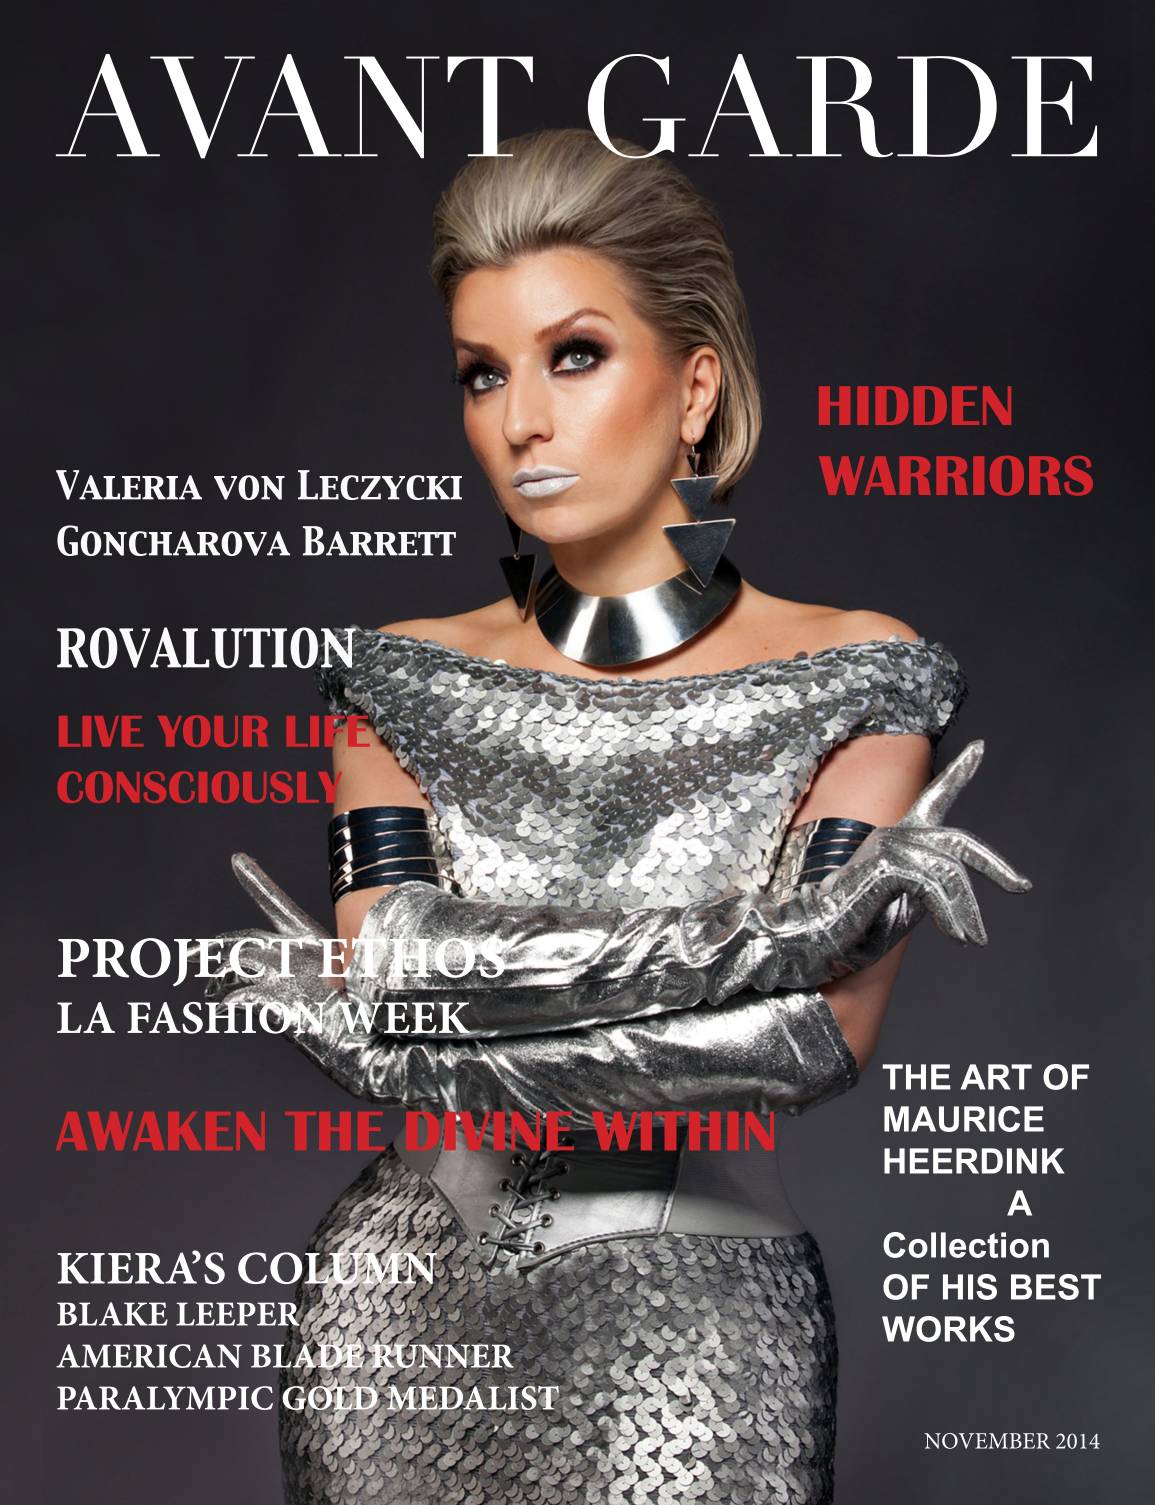 2014 AVANT GARDE magazine, November Issue (on the cover and feature).